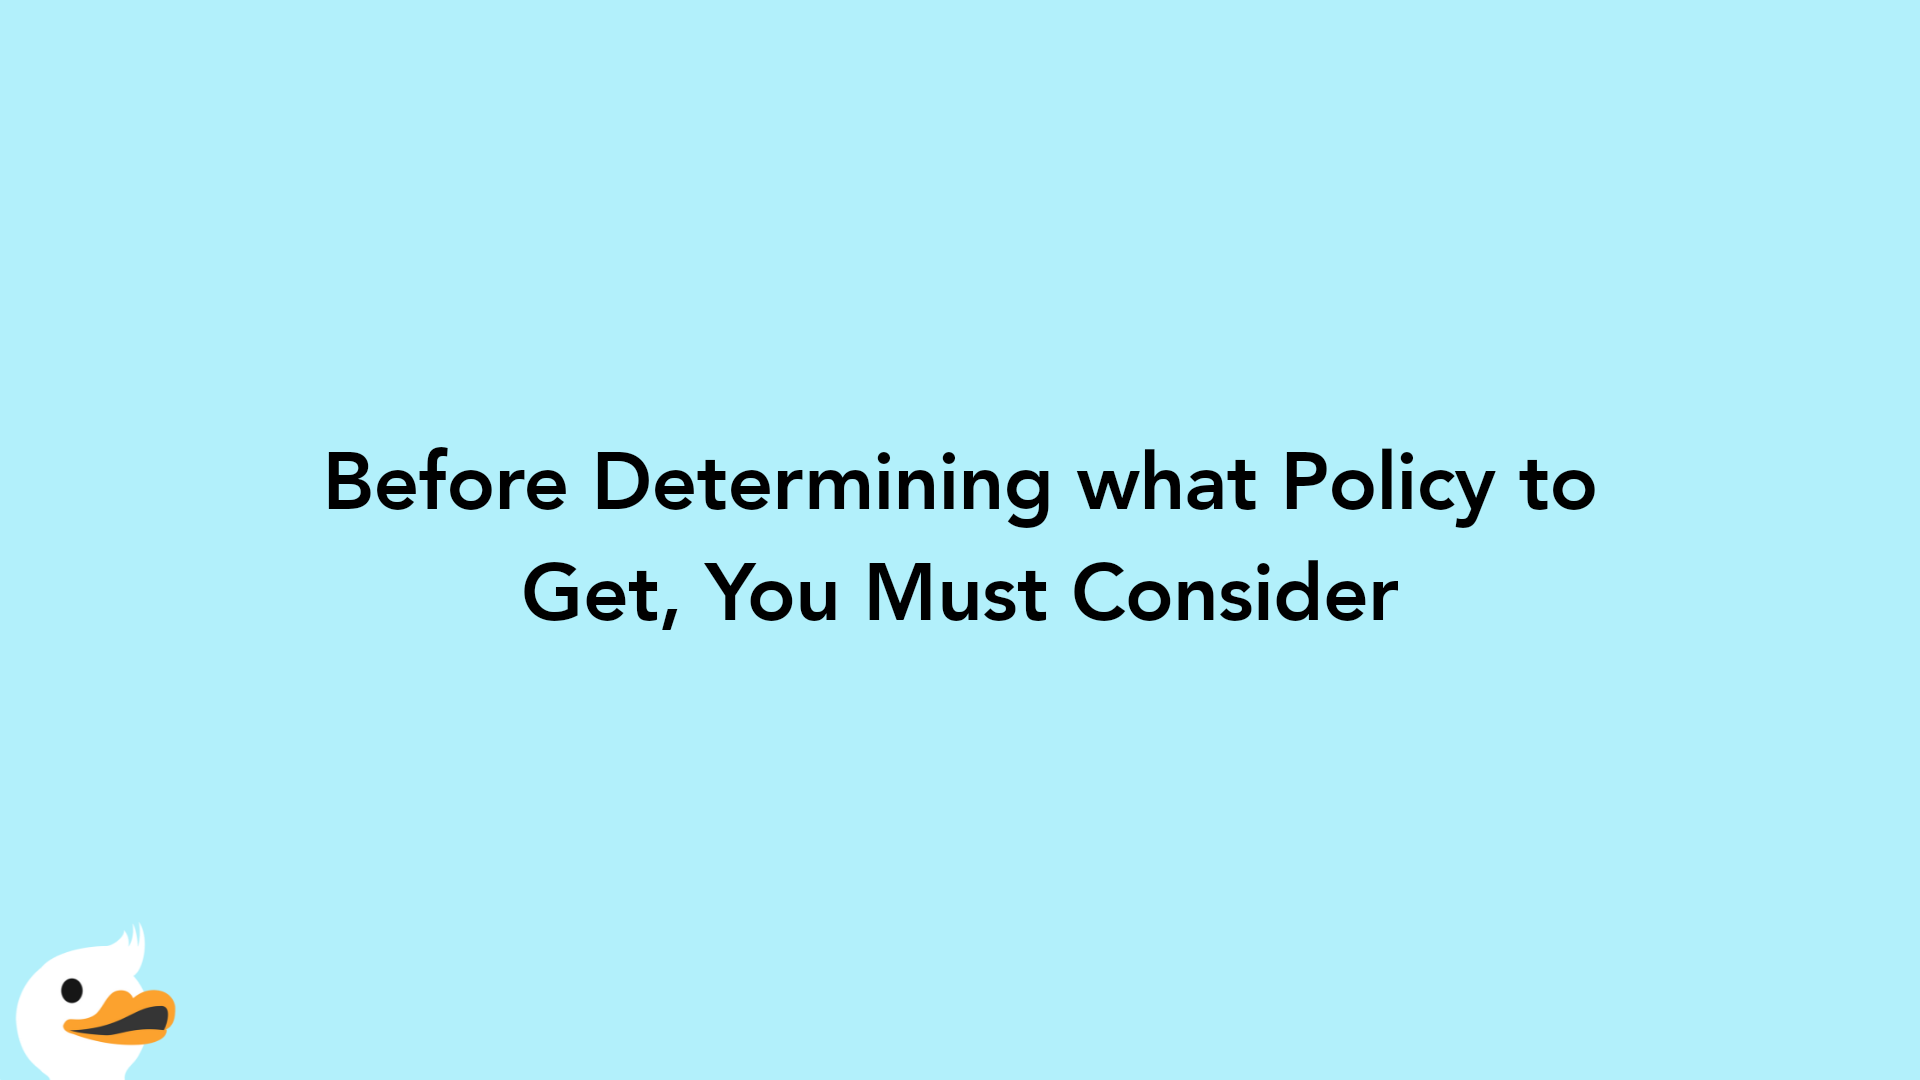 Before Determining what Policy to Get, You Must Consider